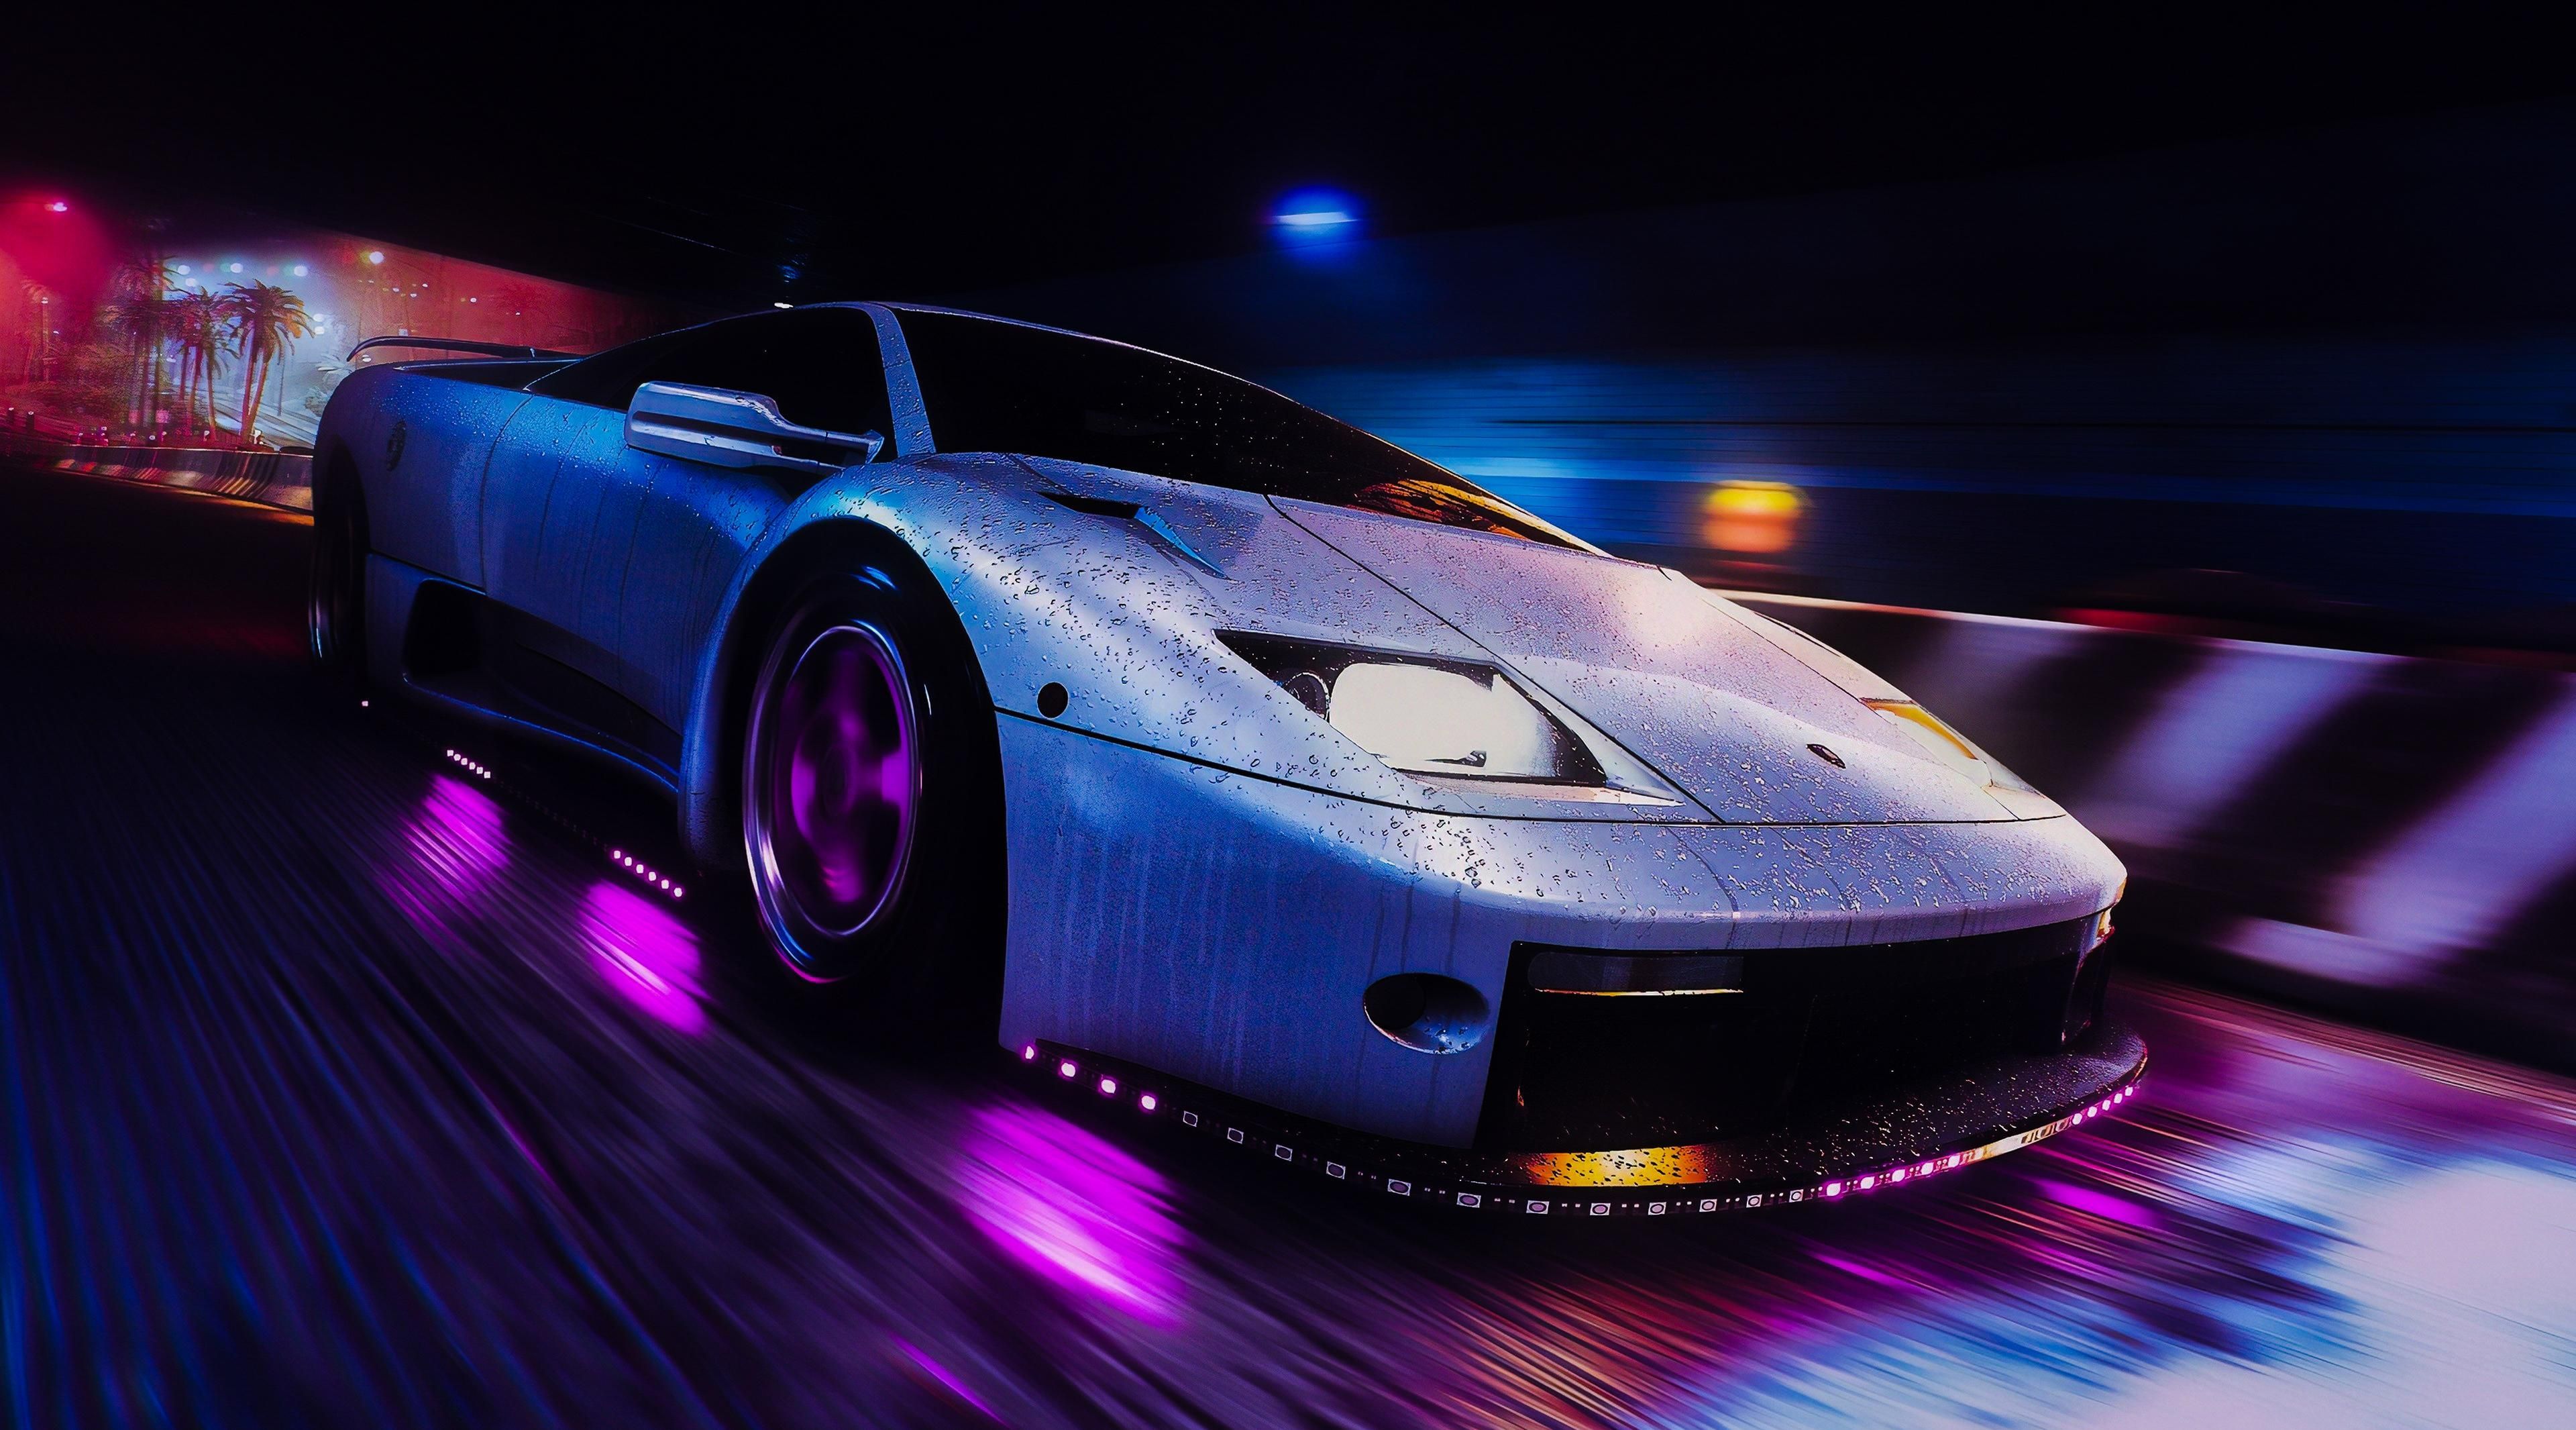 Need For Speed 4K wallpaper. Need for speed, Car, Car wallpaper